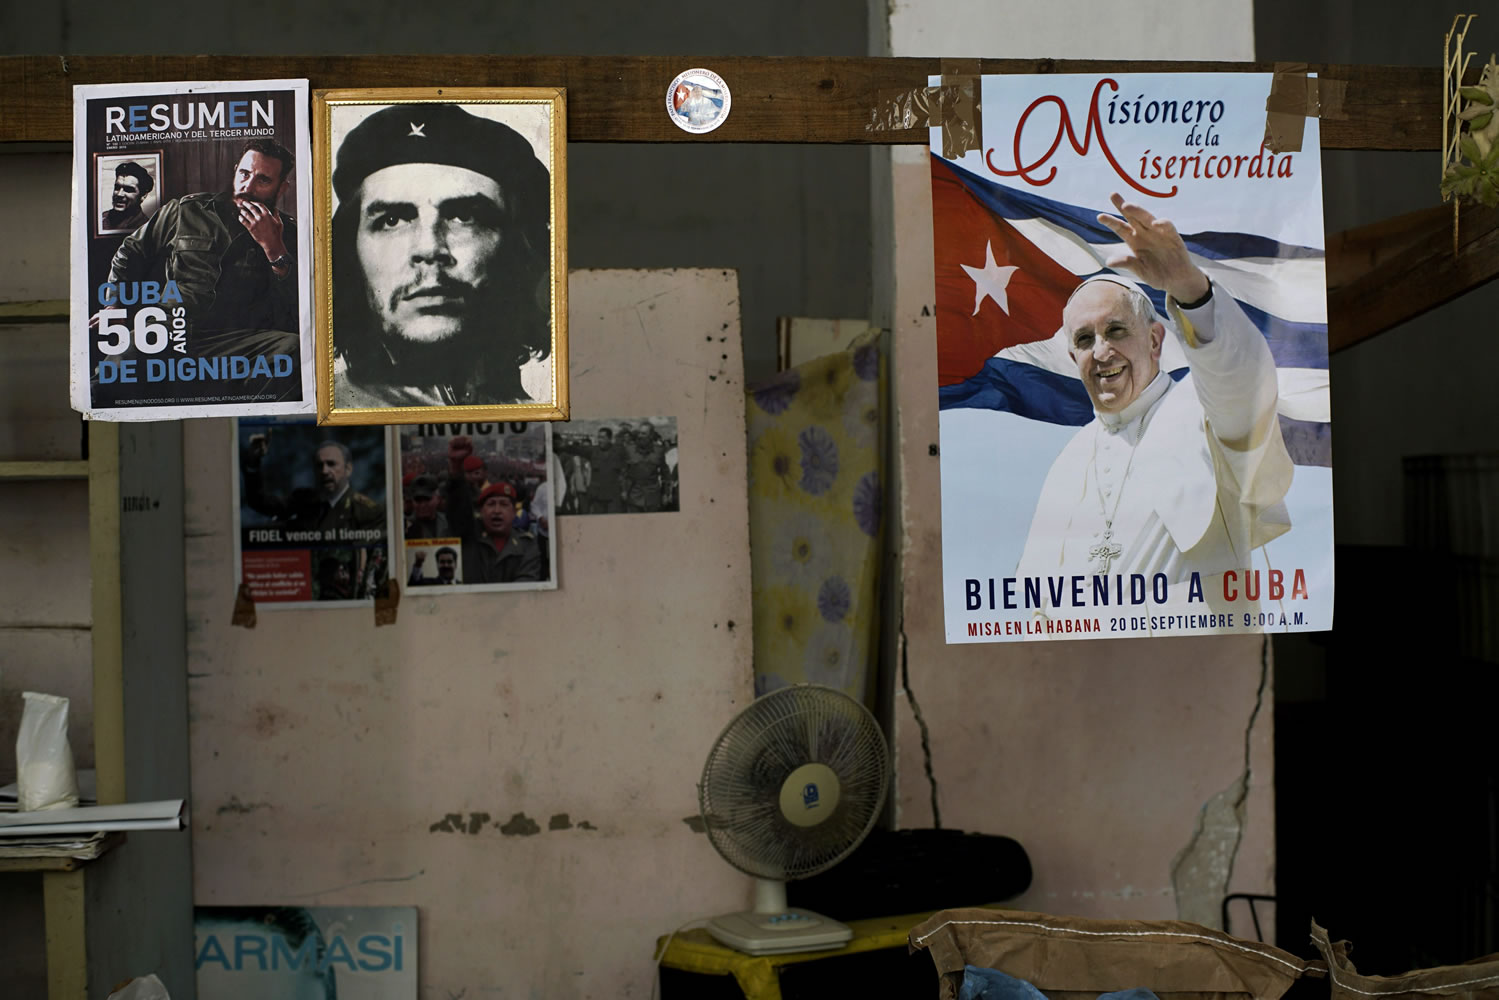 A poster of Pope Francis hangs next to a picture of revolutionary hero Ernesto "Che" Guevara and Fidel Castro inside a state store that sells flour and beans in Havana, Cuba, on Friday. Francis delivered an unprecedented televised message to the Cuban people on Thursday night ahead of a four-day trip to the island.